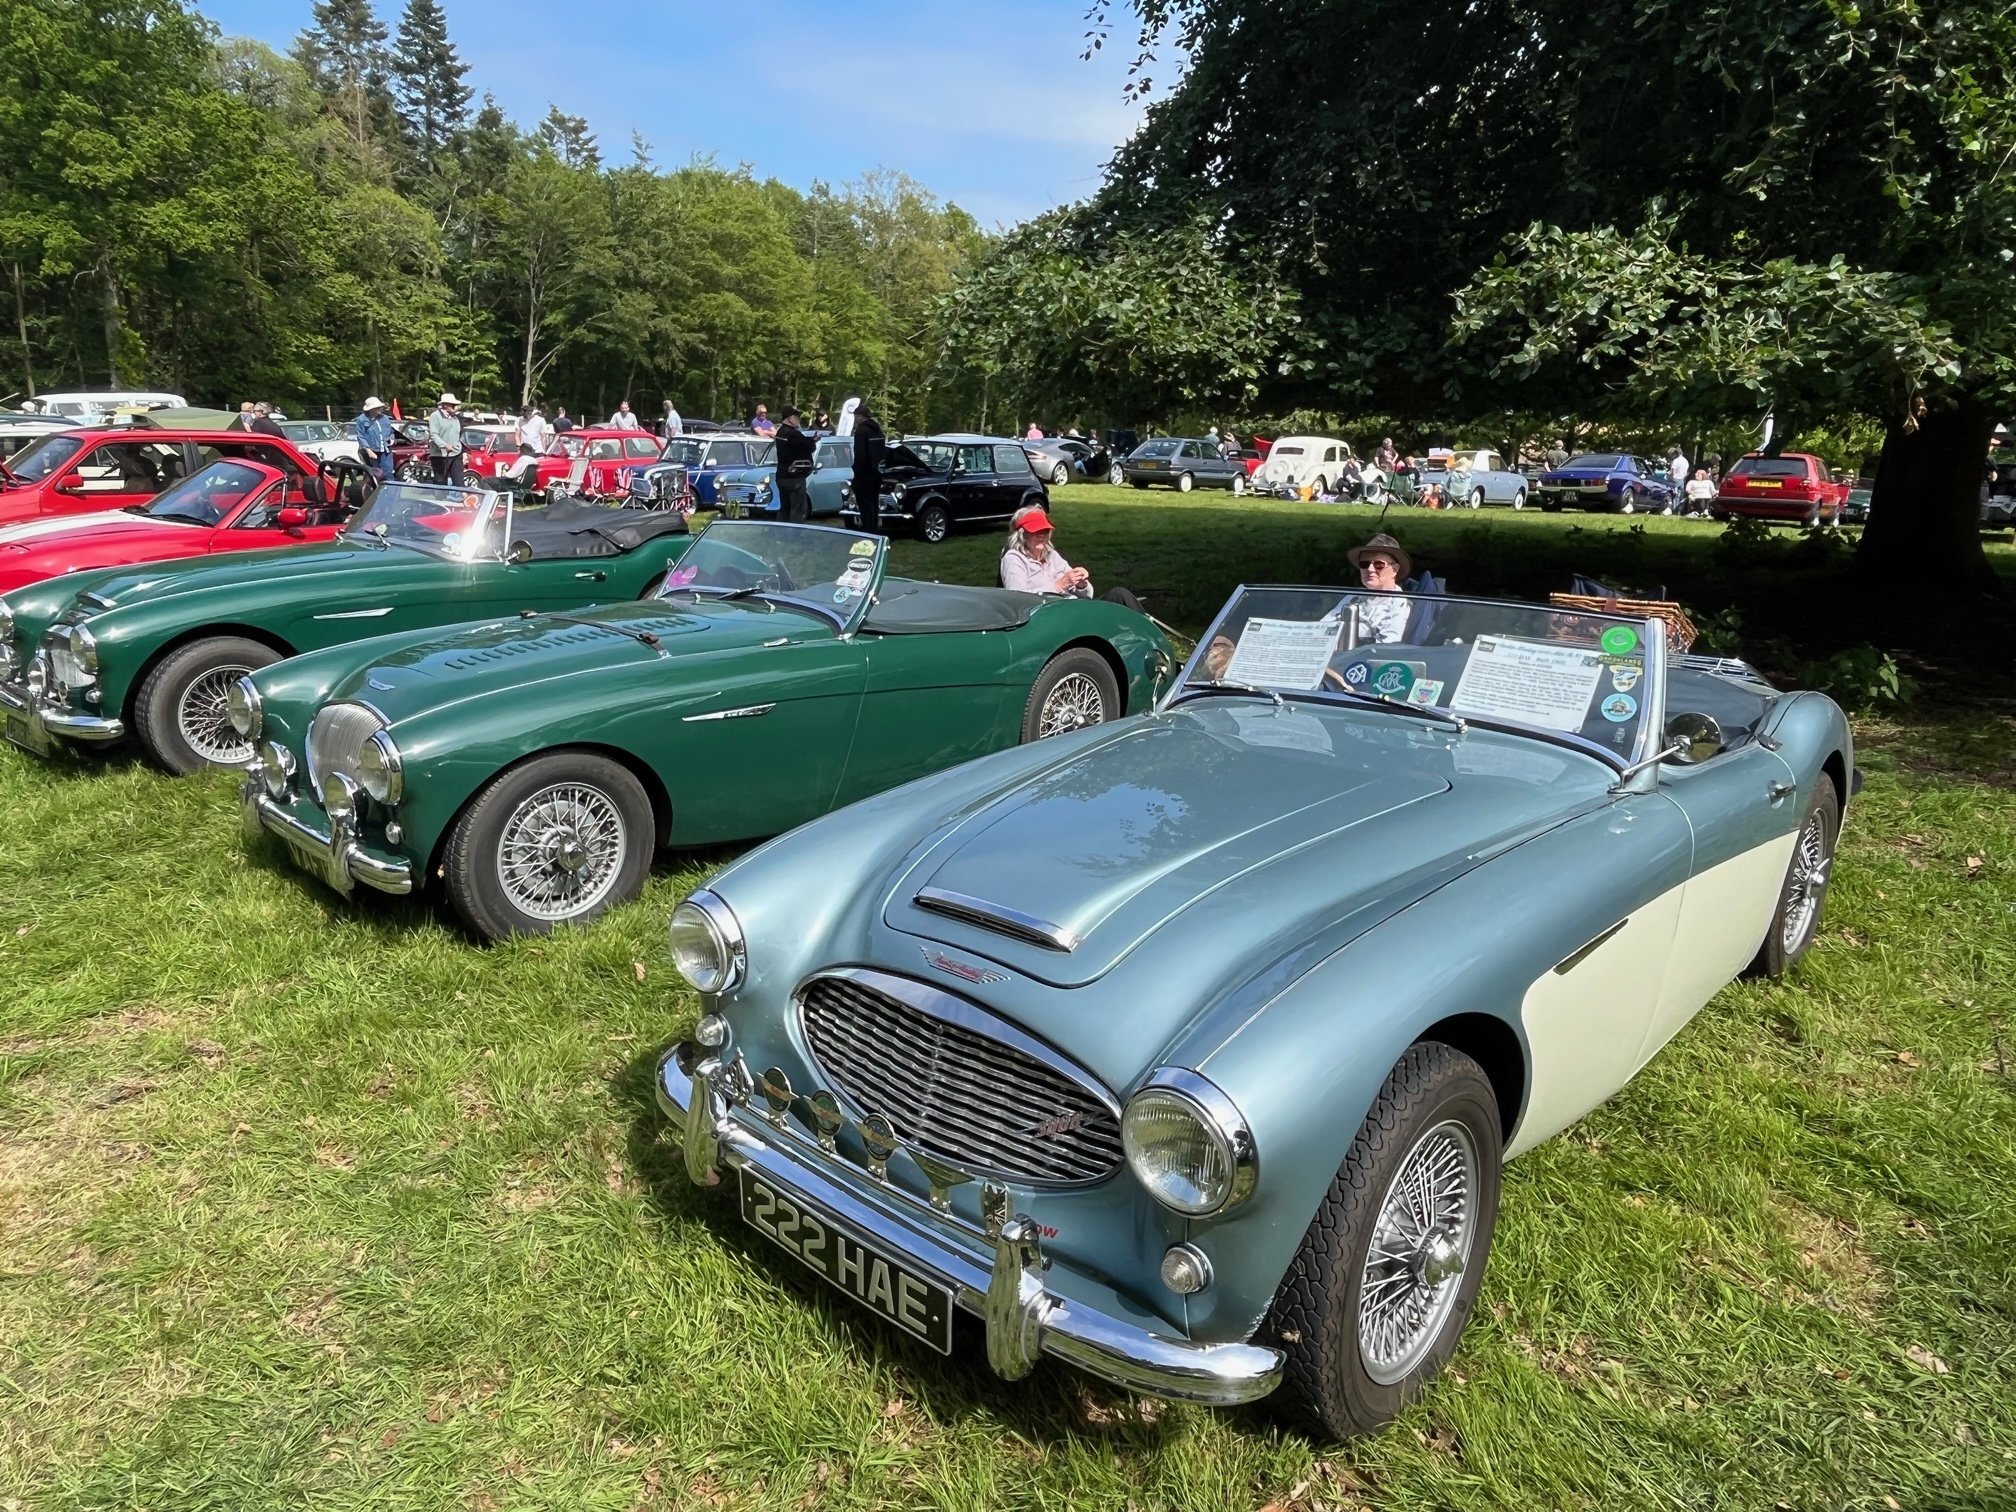 Classics at Stody Lodge Gardens_high res_credit Stody Lodge Gardens.jpg